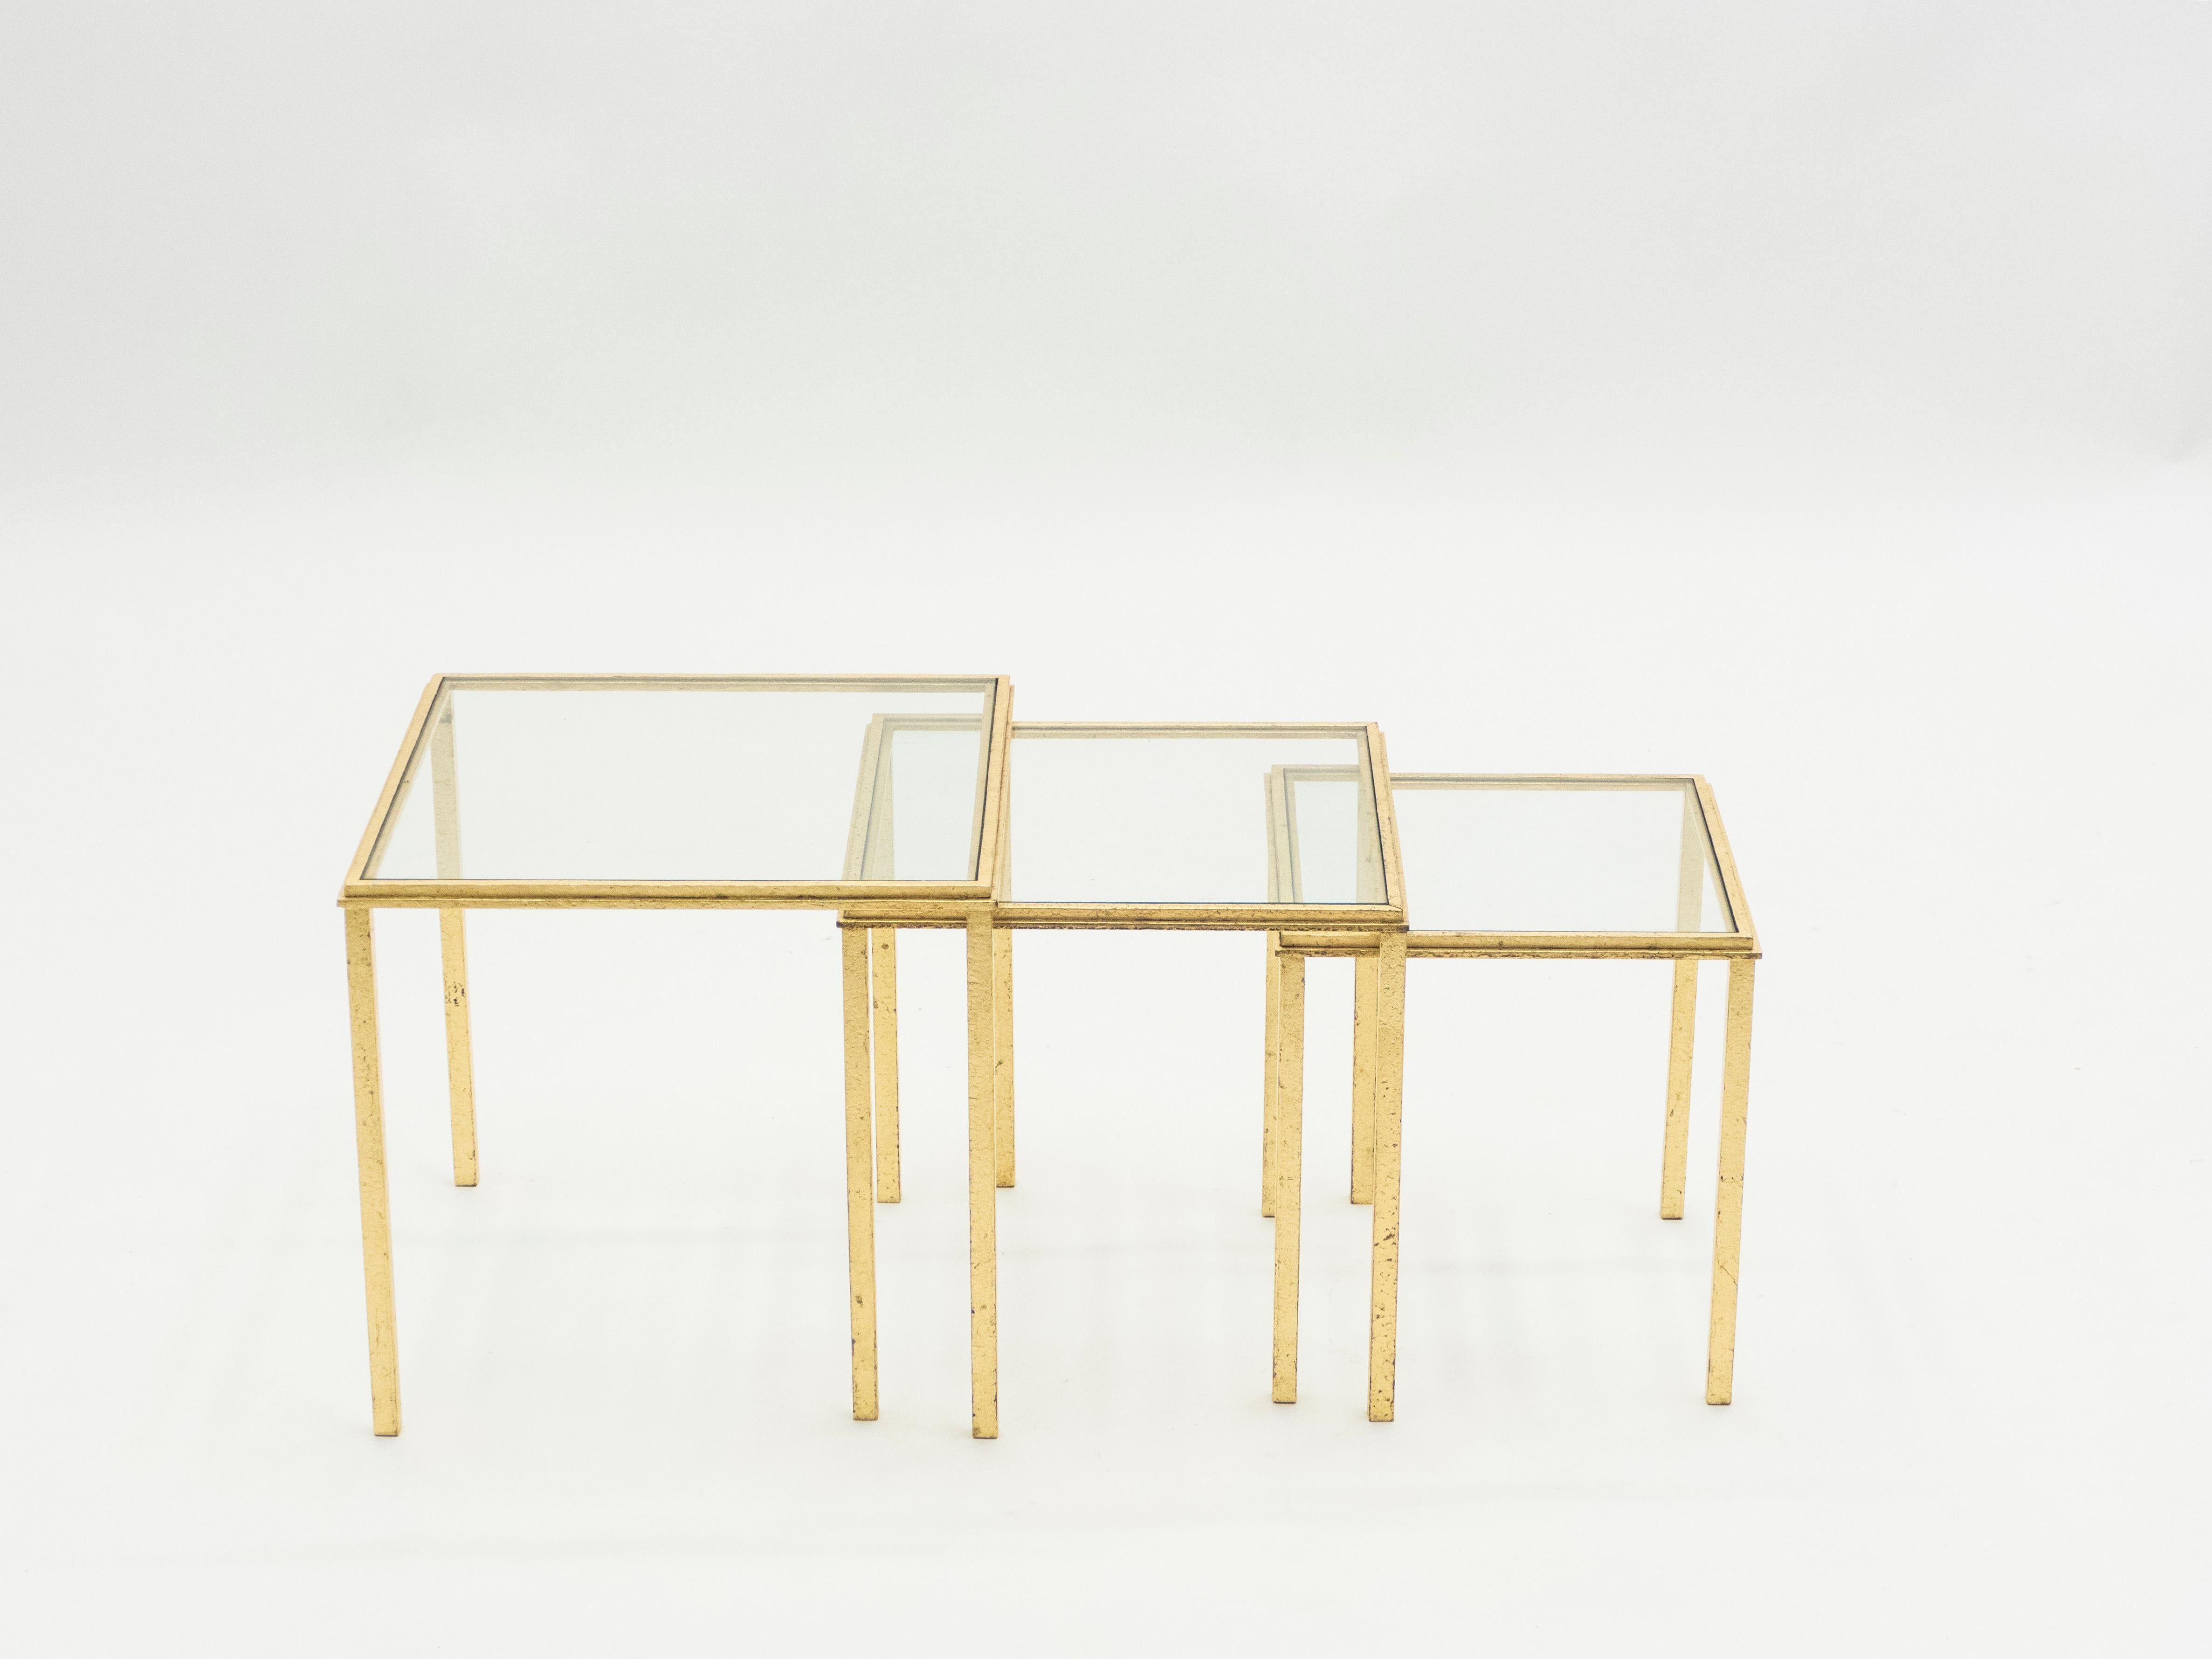 Midcentury Roger Thibier Gilt Wrought Iron Gold Leaf Nesting Tables, 1960s For Sale 4